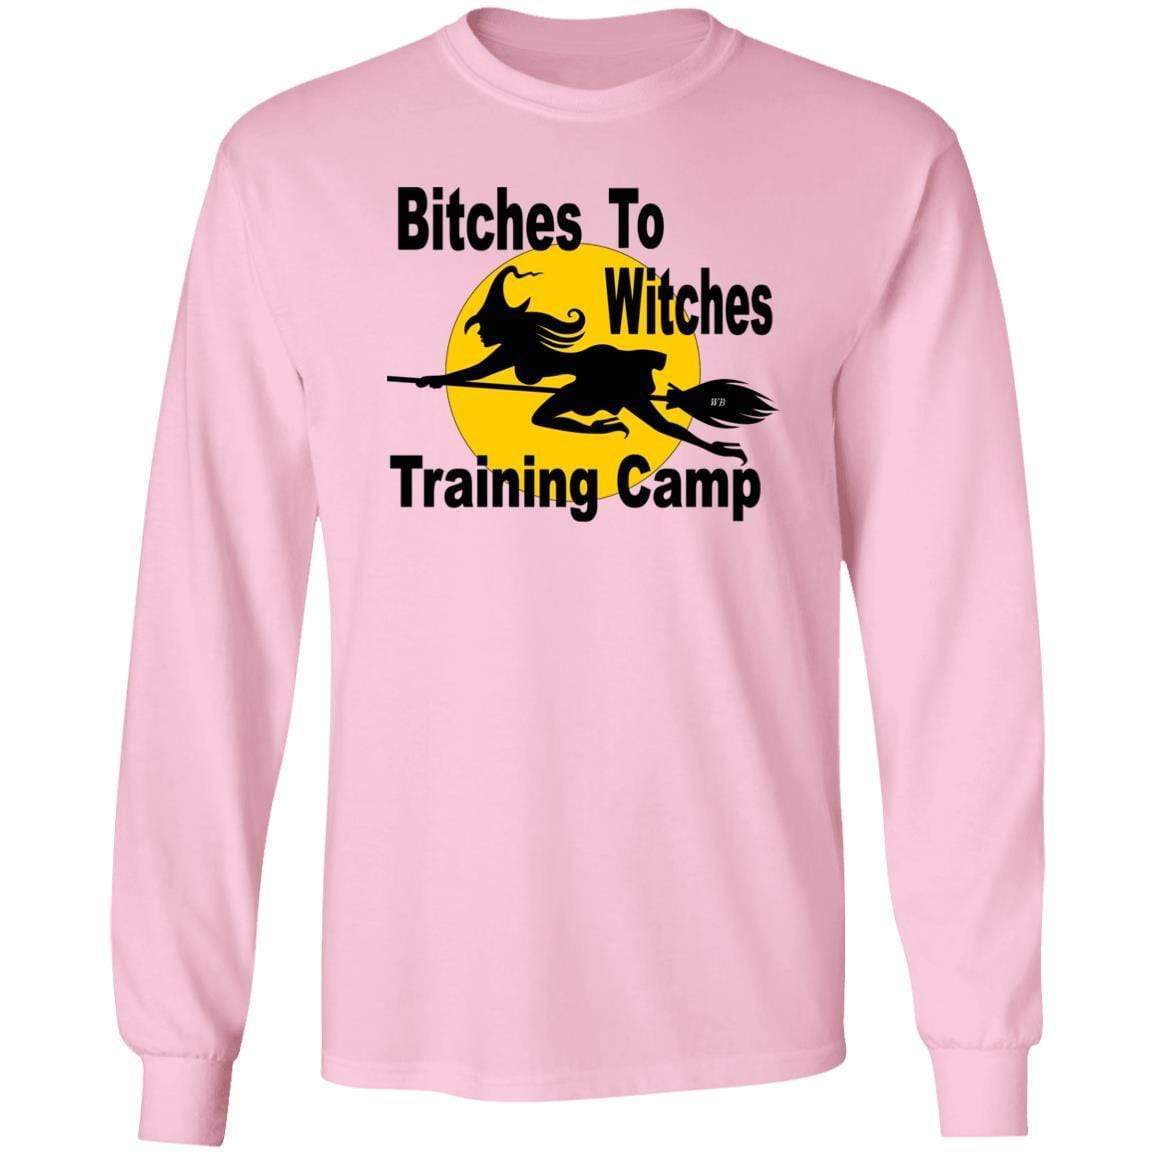 T-Shirts Light Pink / S WineyBitches.Co "Bitches To Witches Training Camp" LS Ultra Cotton T-Shirt WineyBitchesCo